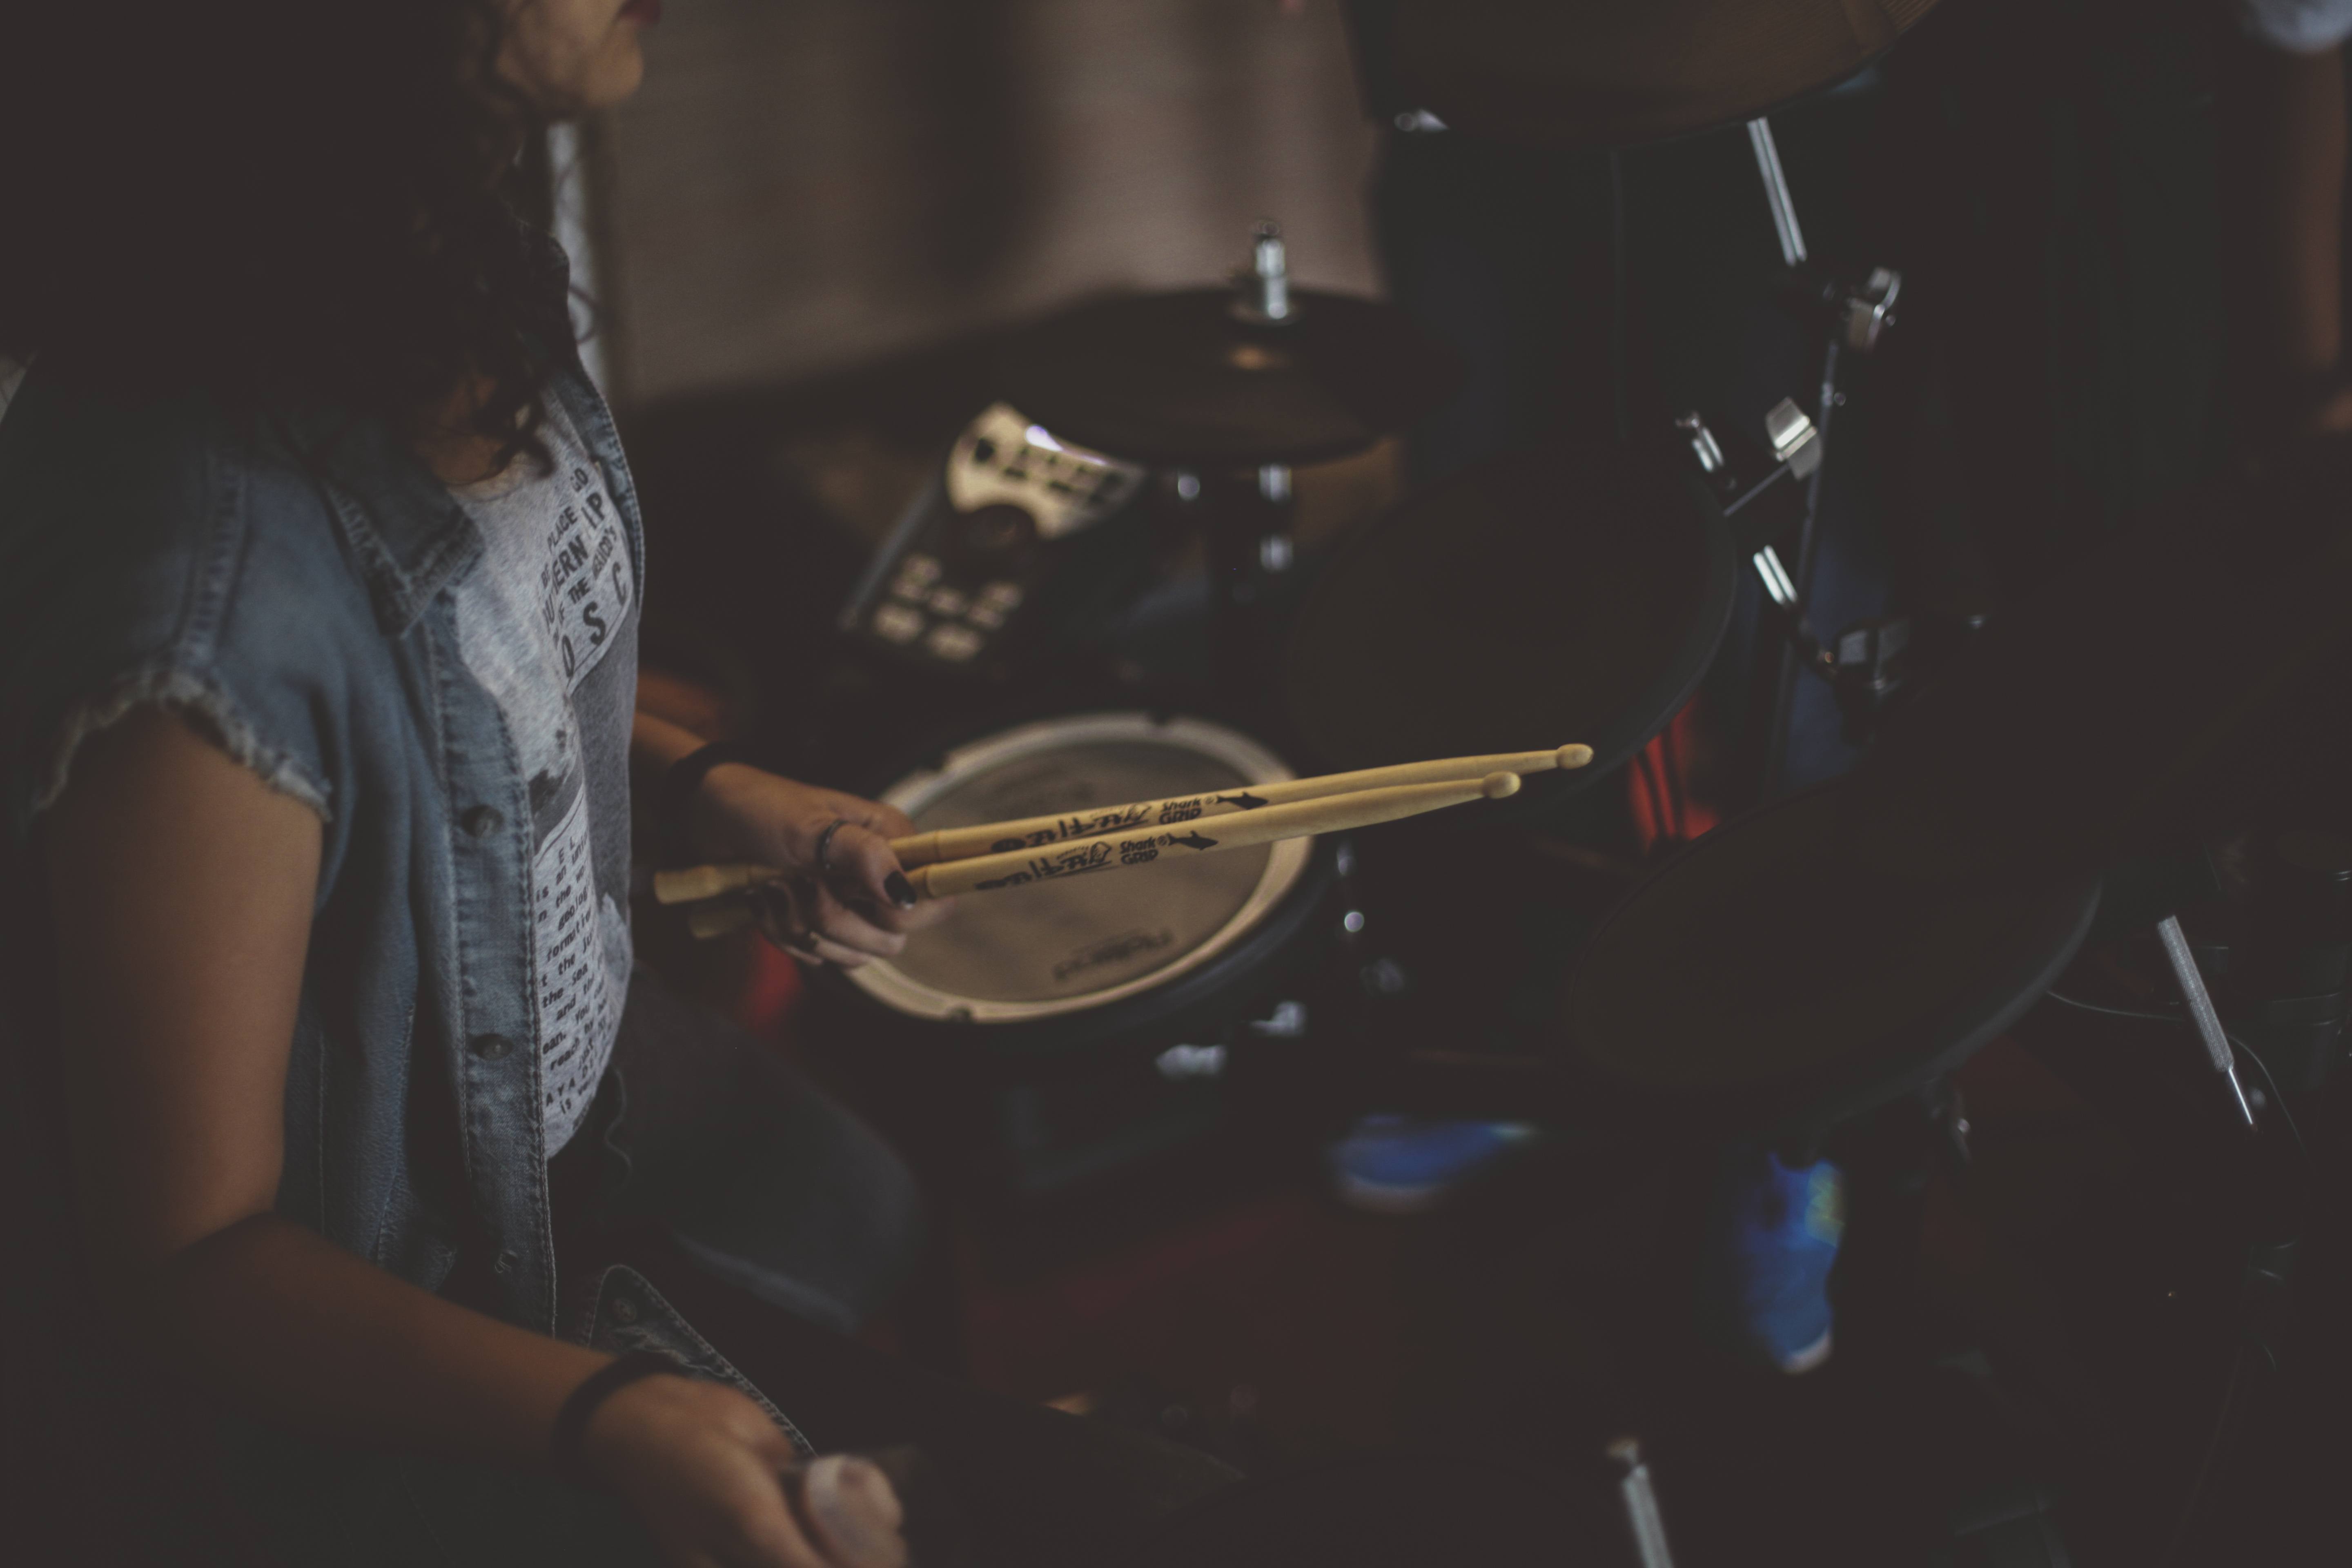 Drumming Can Largely Improve Your Mental Health, Science Says